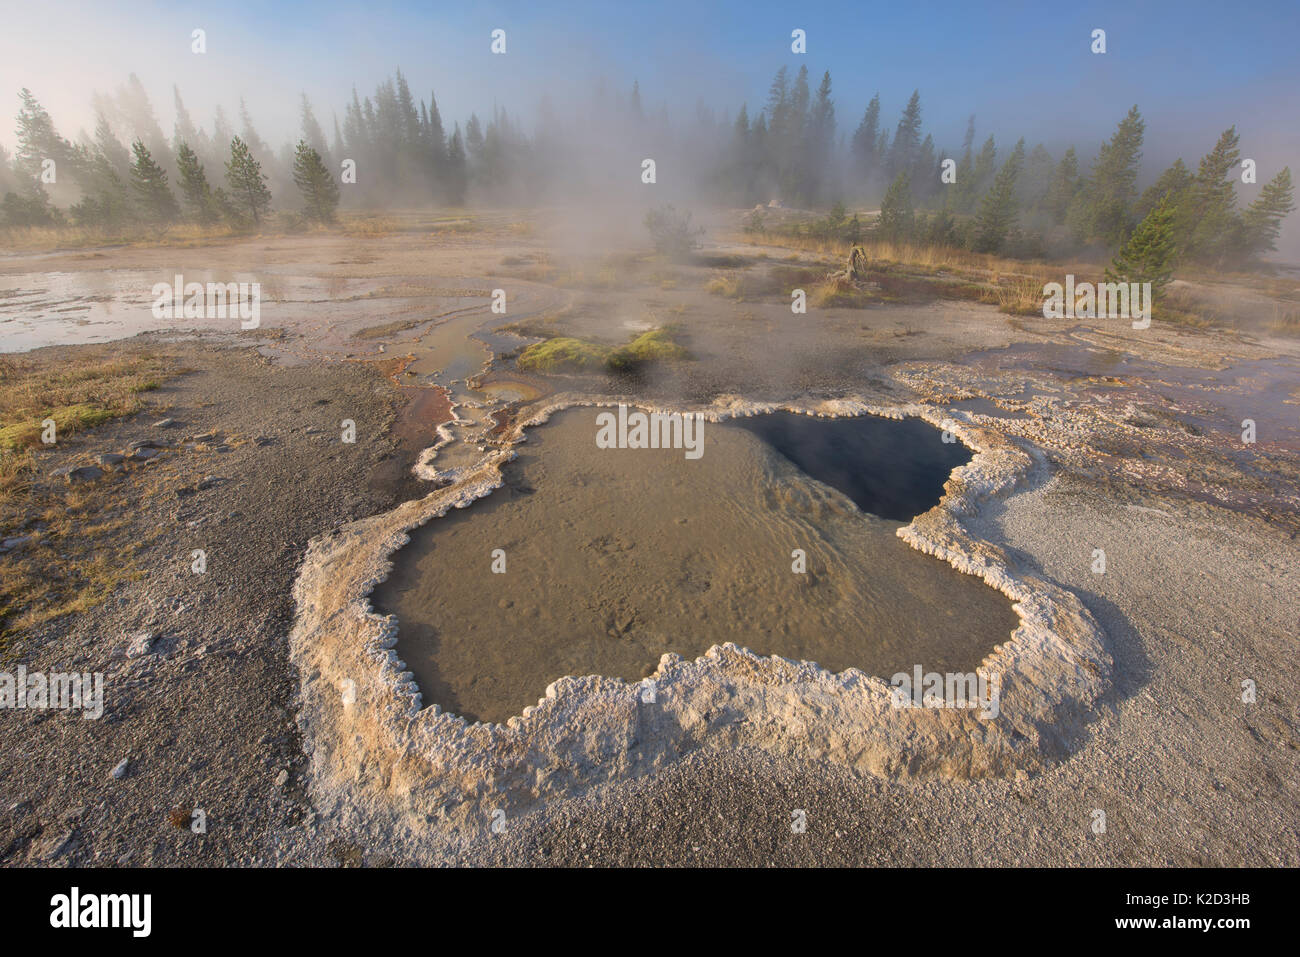 Lily flower shaped Fleur de Lis Spring, in the Orion Group of Geysers, Shoshone Geyser Basin, Yellowstone National Park, Wyoming, USA, August 2015. Stock Photo